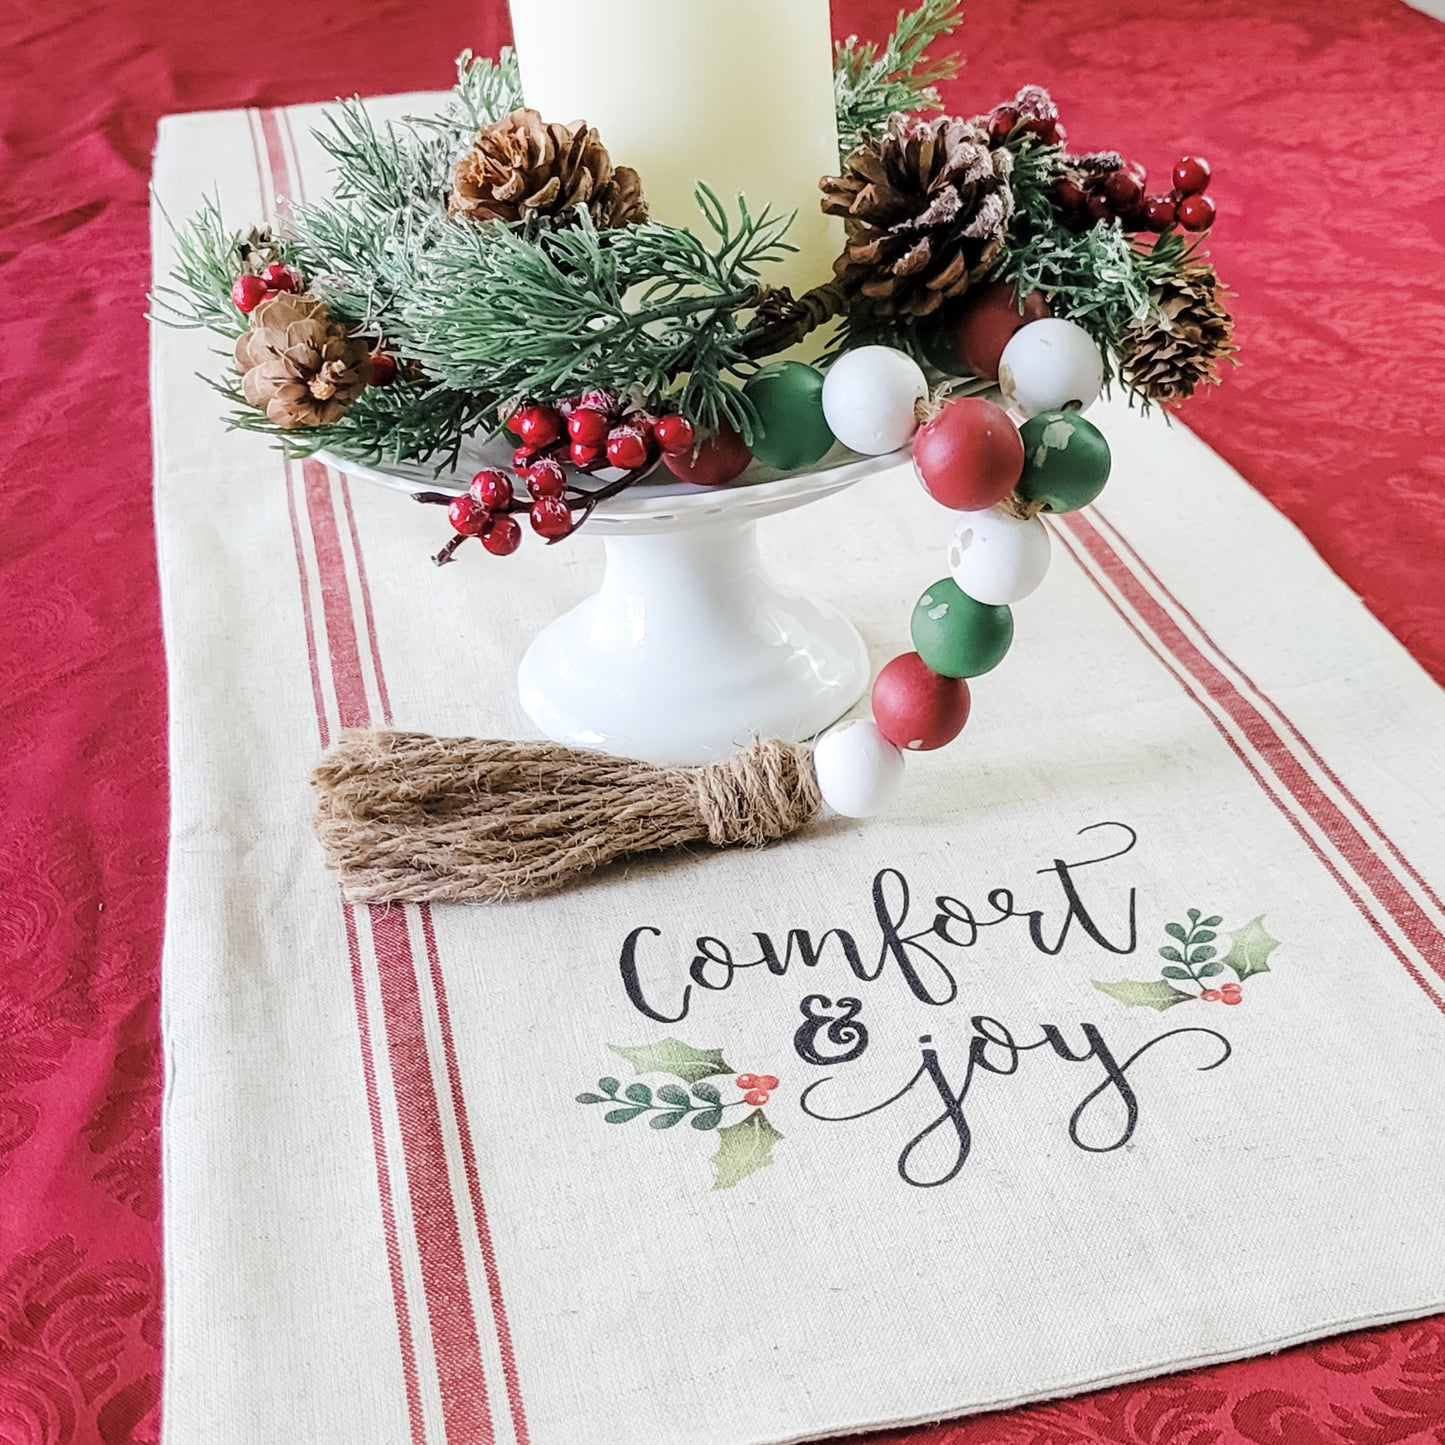 Comfort and Joy Table Runner